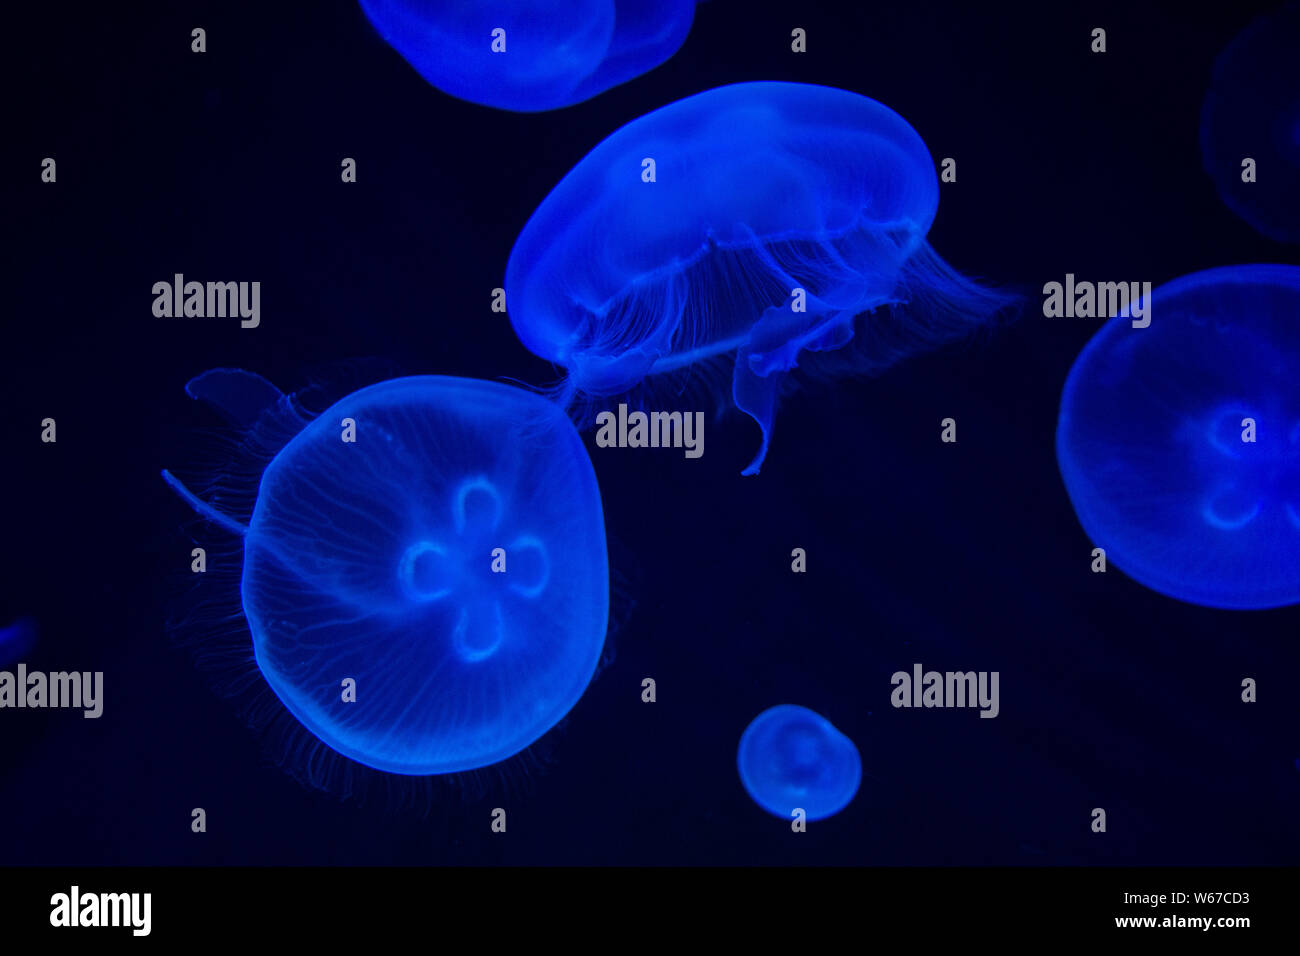 Common Jellyfish (Aurelia aurita) with a dark background in blue tones (also called, moon jellyfish, moon jelly, or saucer jelly) Stock Photo